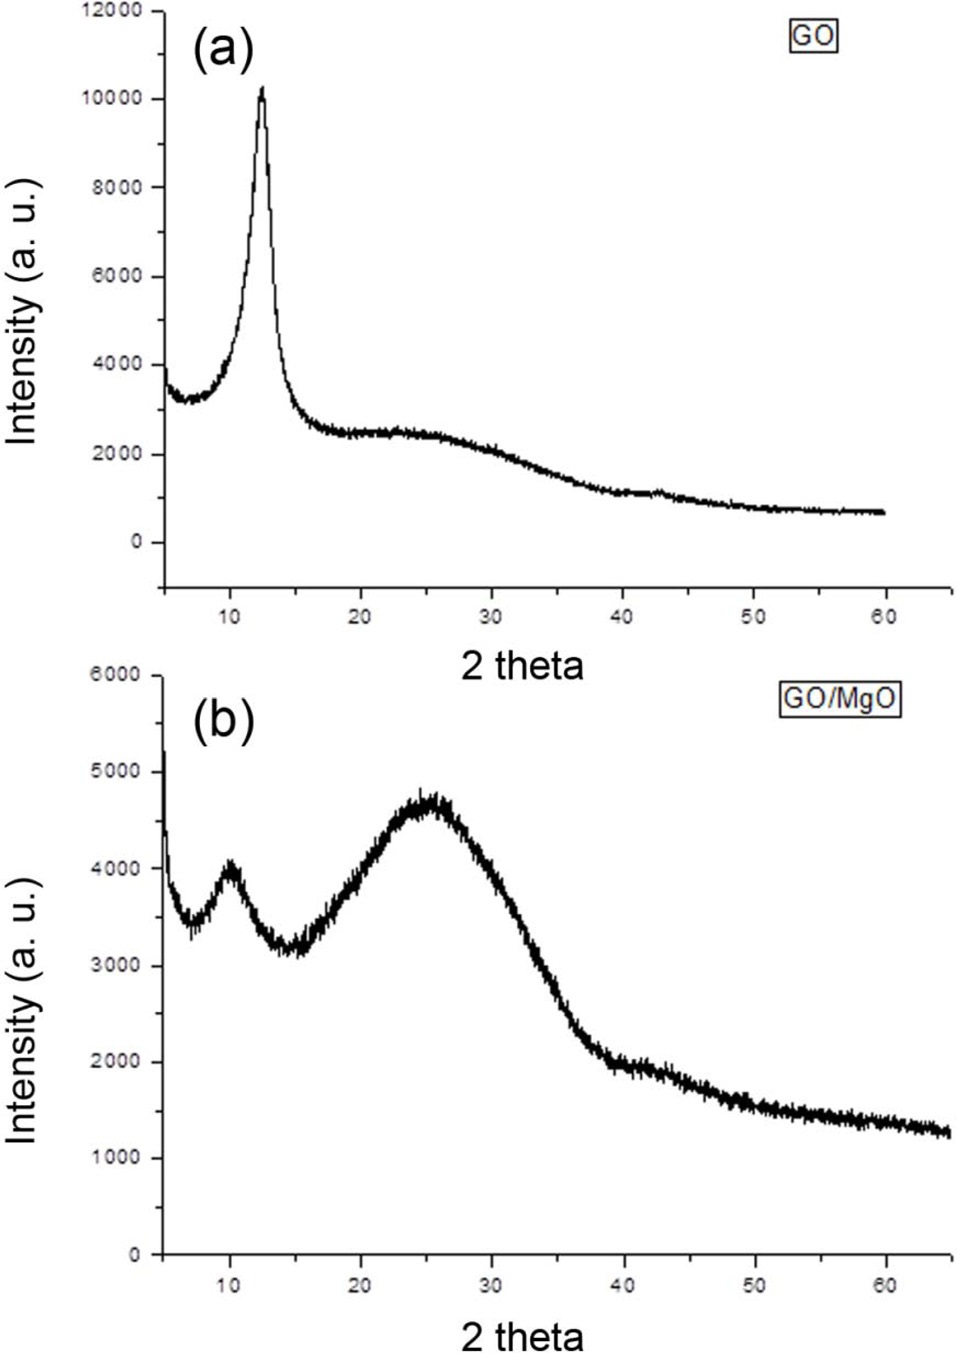 X-ray diffraction spectra of the samples: (a) GOs, (b) MgO/GOs.
GOs: graphene oxides, MgO: magnesium oxide.